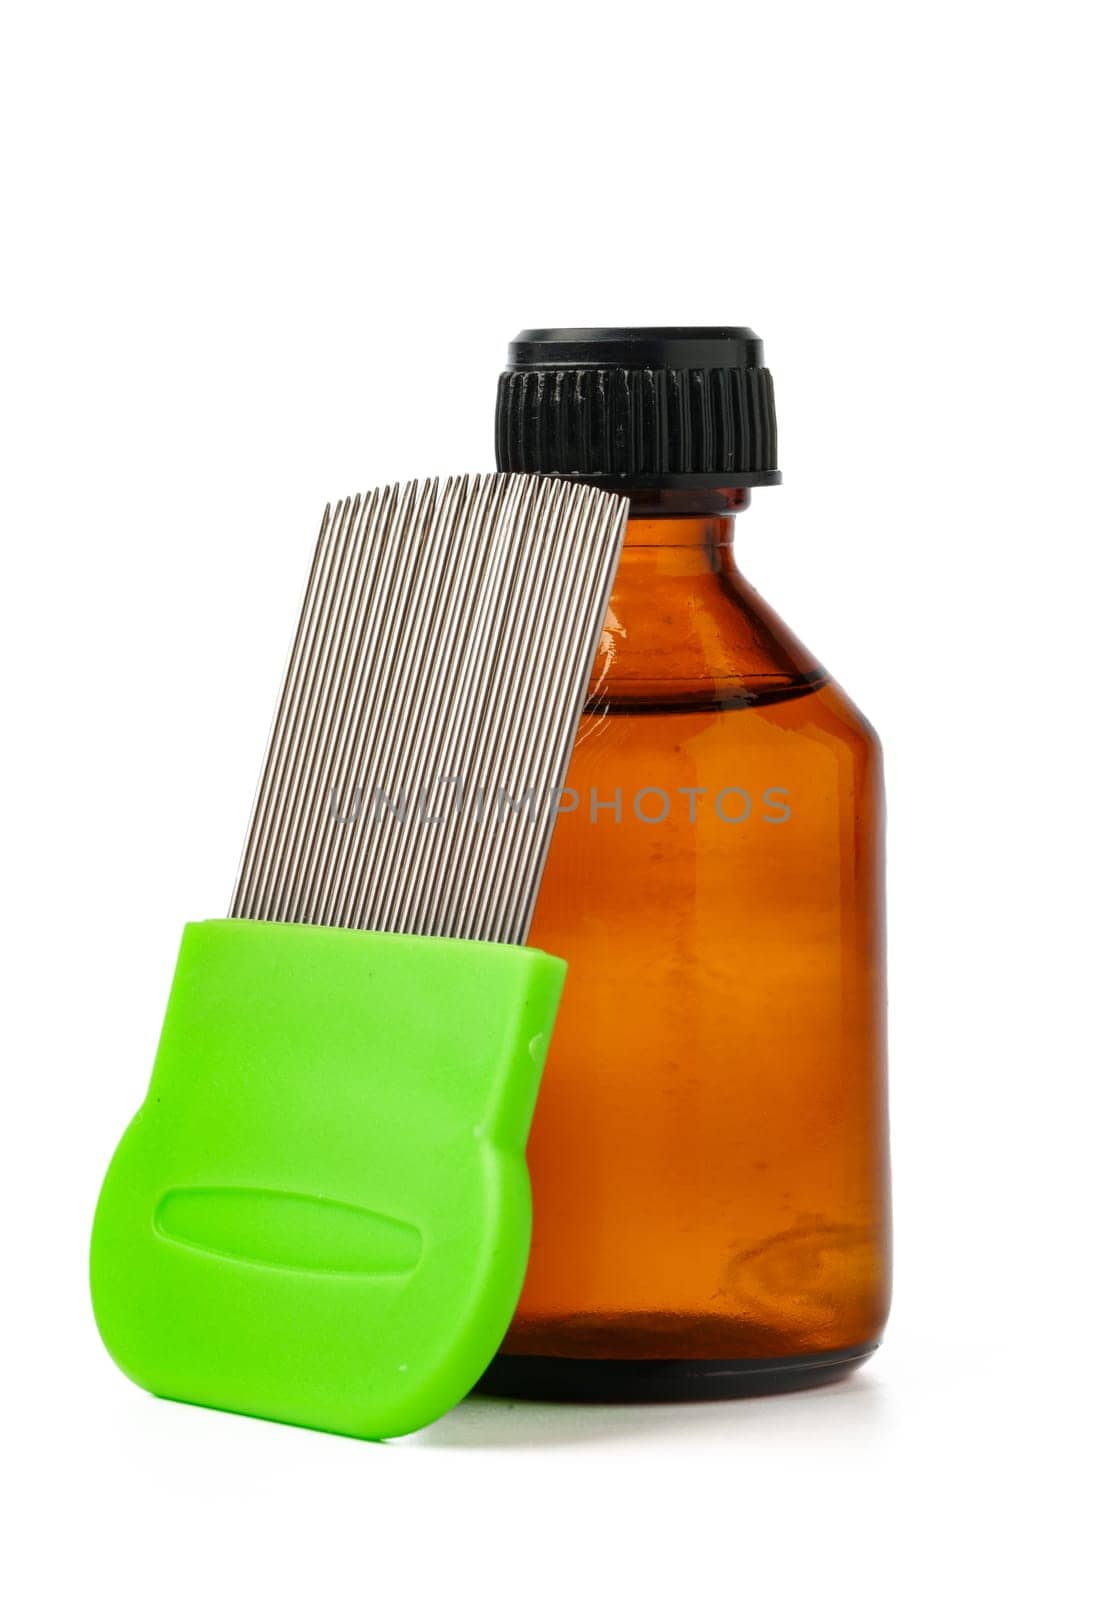 Cosmetic products and lice comb isolated on white background by Fabrikasimf